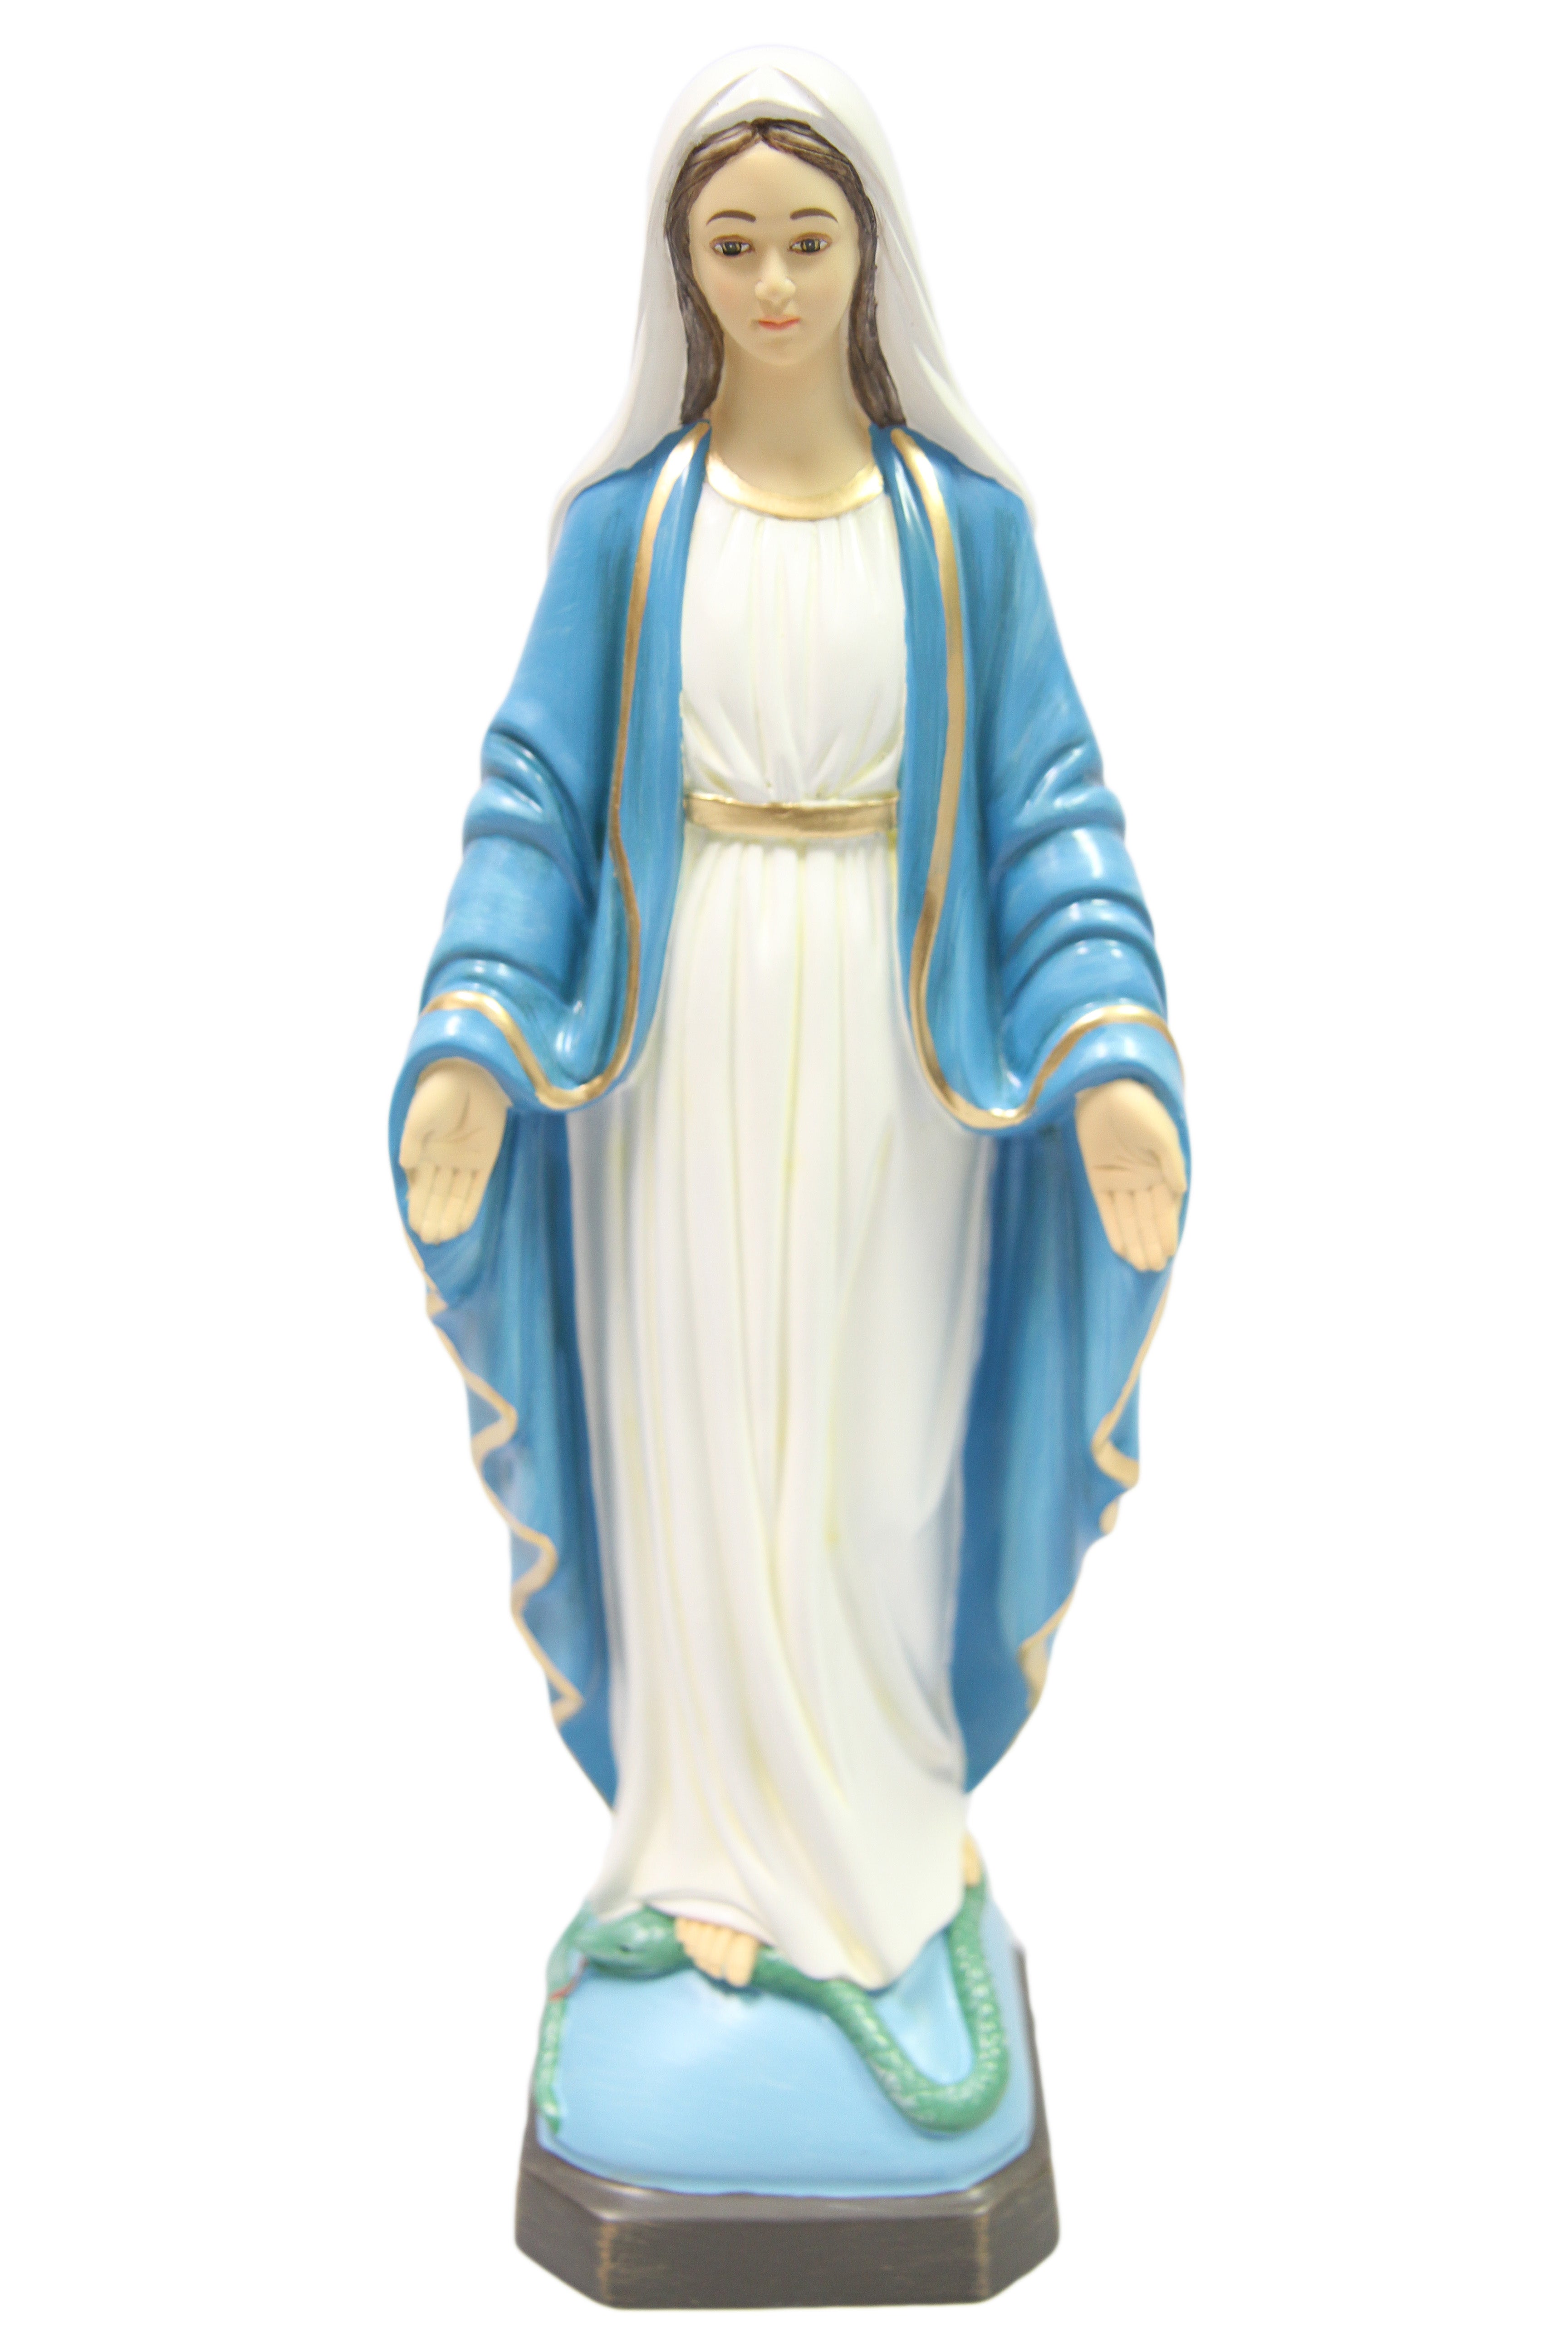 16 Inch Our Lady of Grace Virgin Mary Statue Vittoria Collection Made in Italy